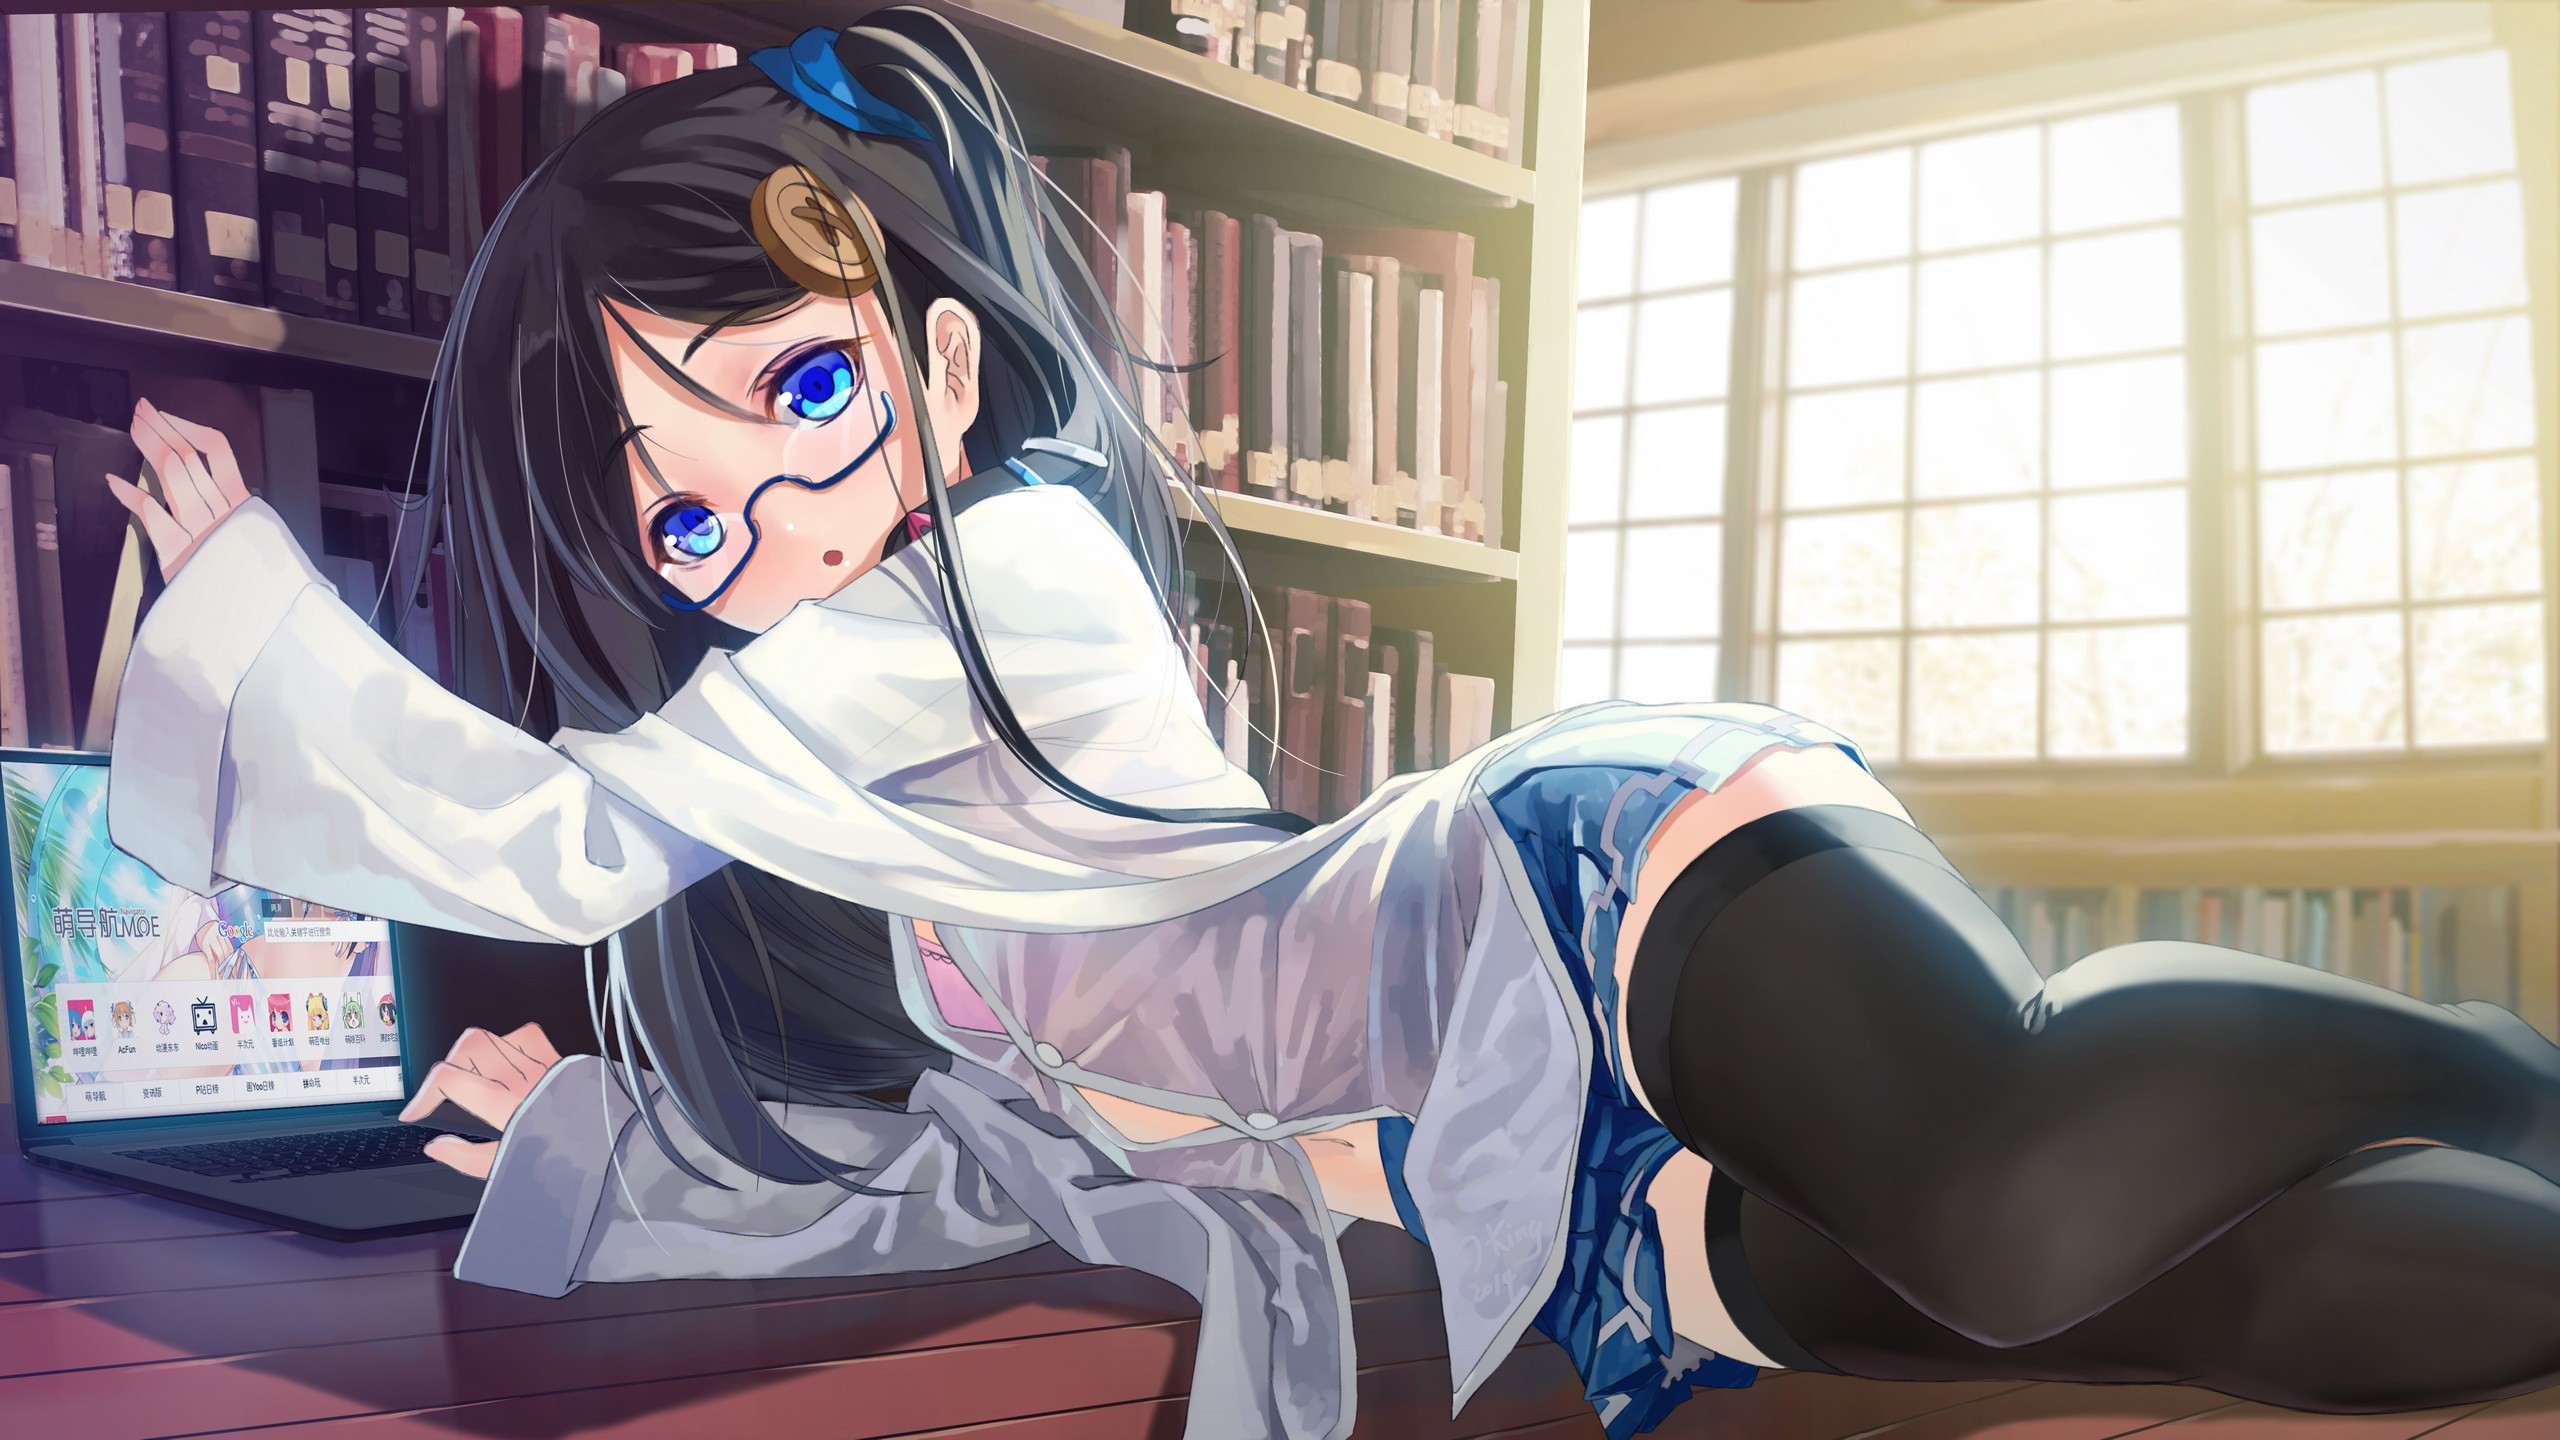 Anime 2560x1440 thigh-highs glasses meganekko original characters anime girls stockings anime women indoors women indoors laptop computer women with glasses dark hair black stockings books legs together lying on side looking at viewer